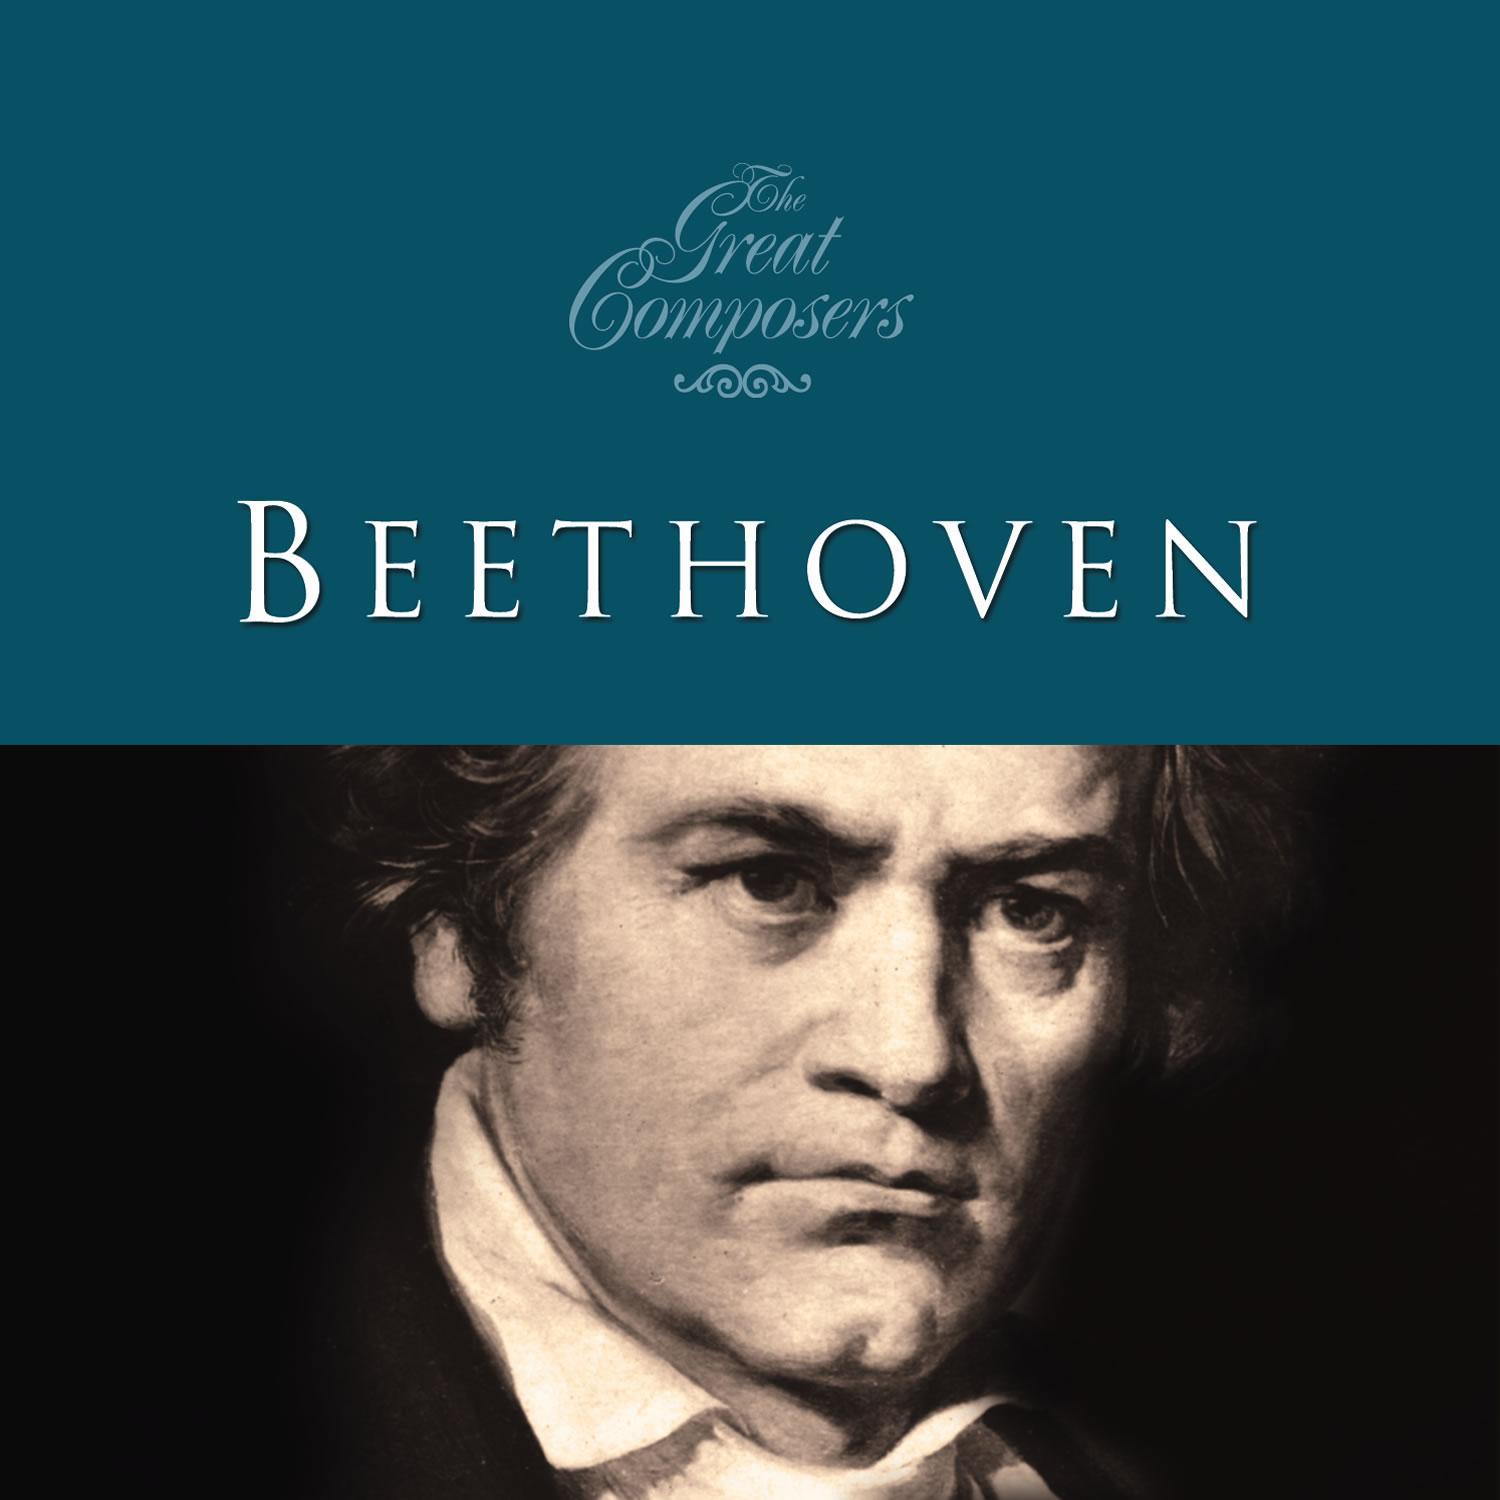 The Great Composers Beethoven